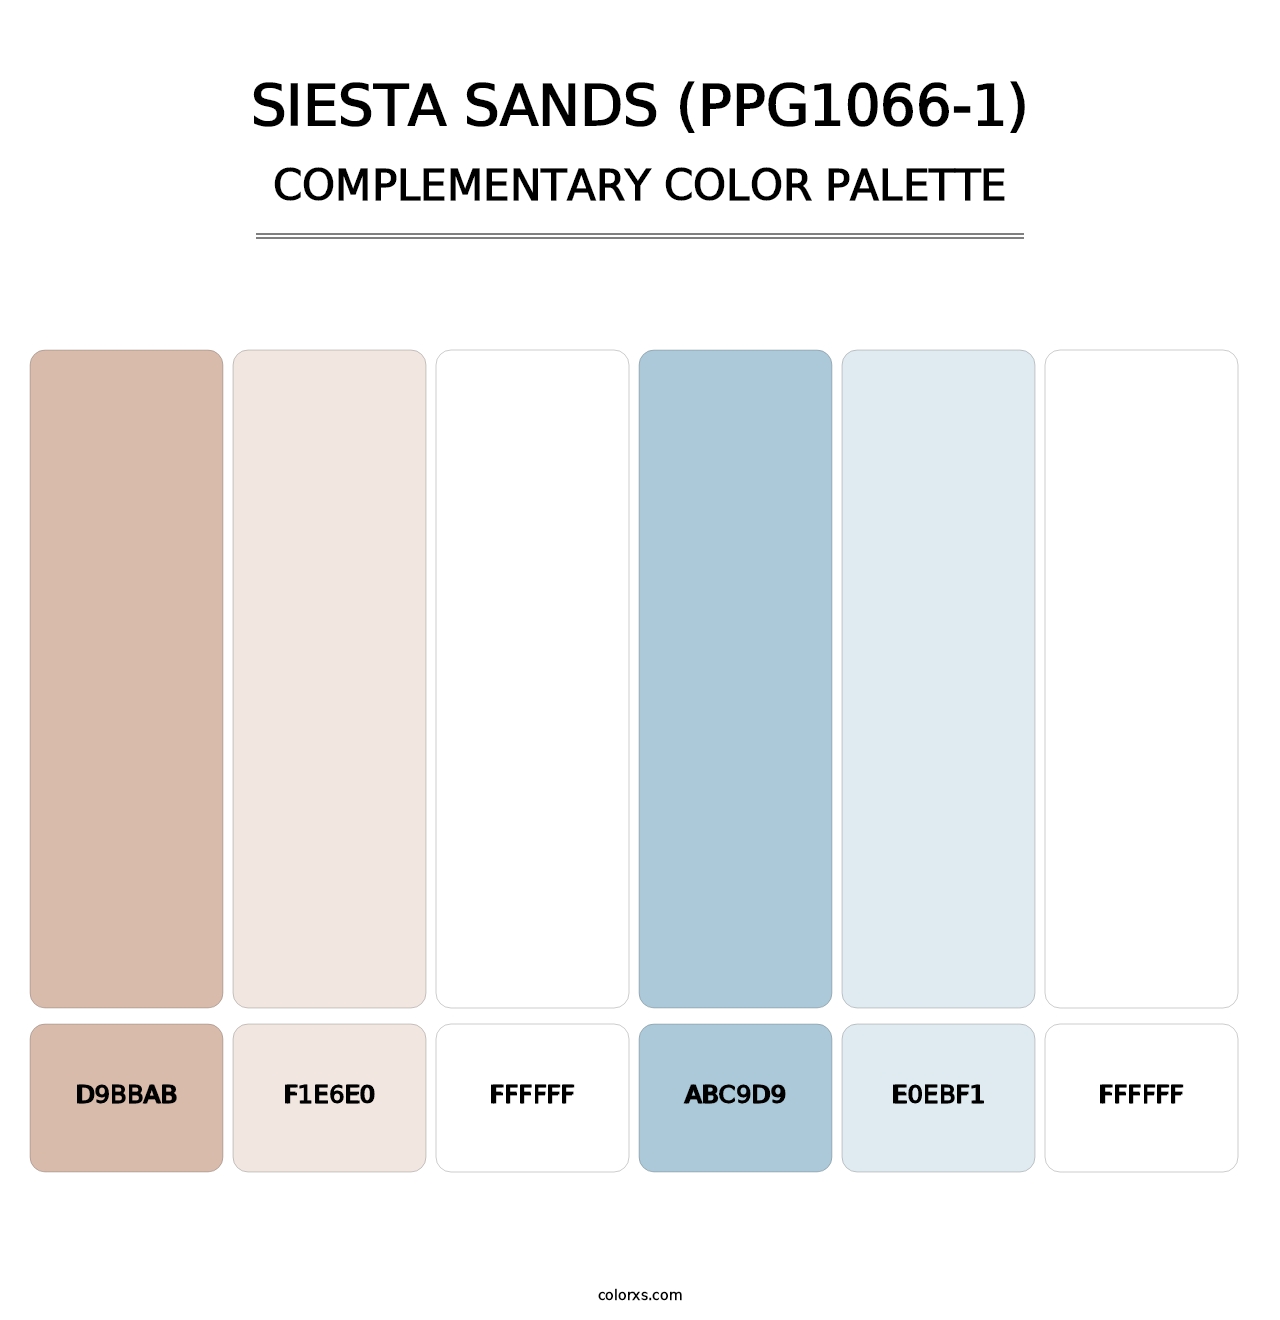 Siesta Sands (PPG1066-1) - Complementary Color Palette